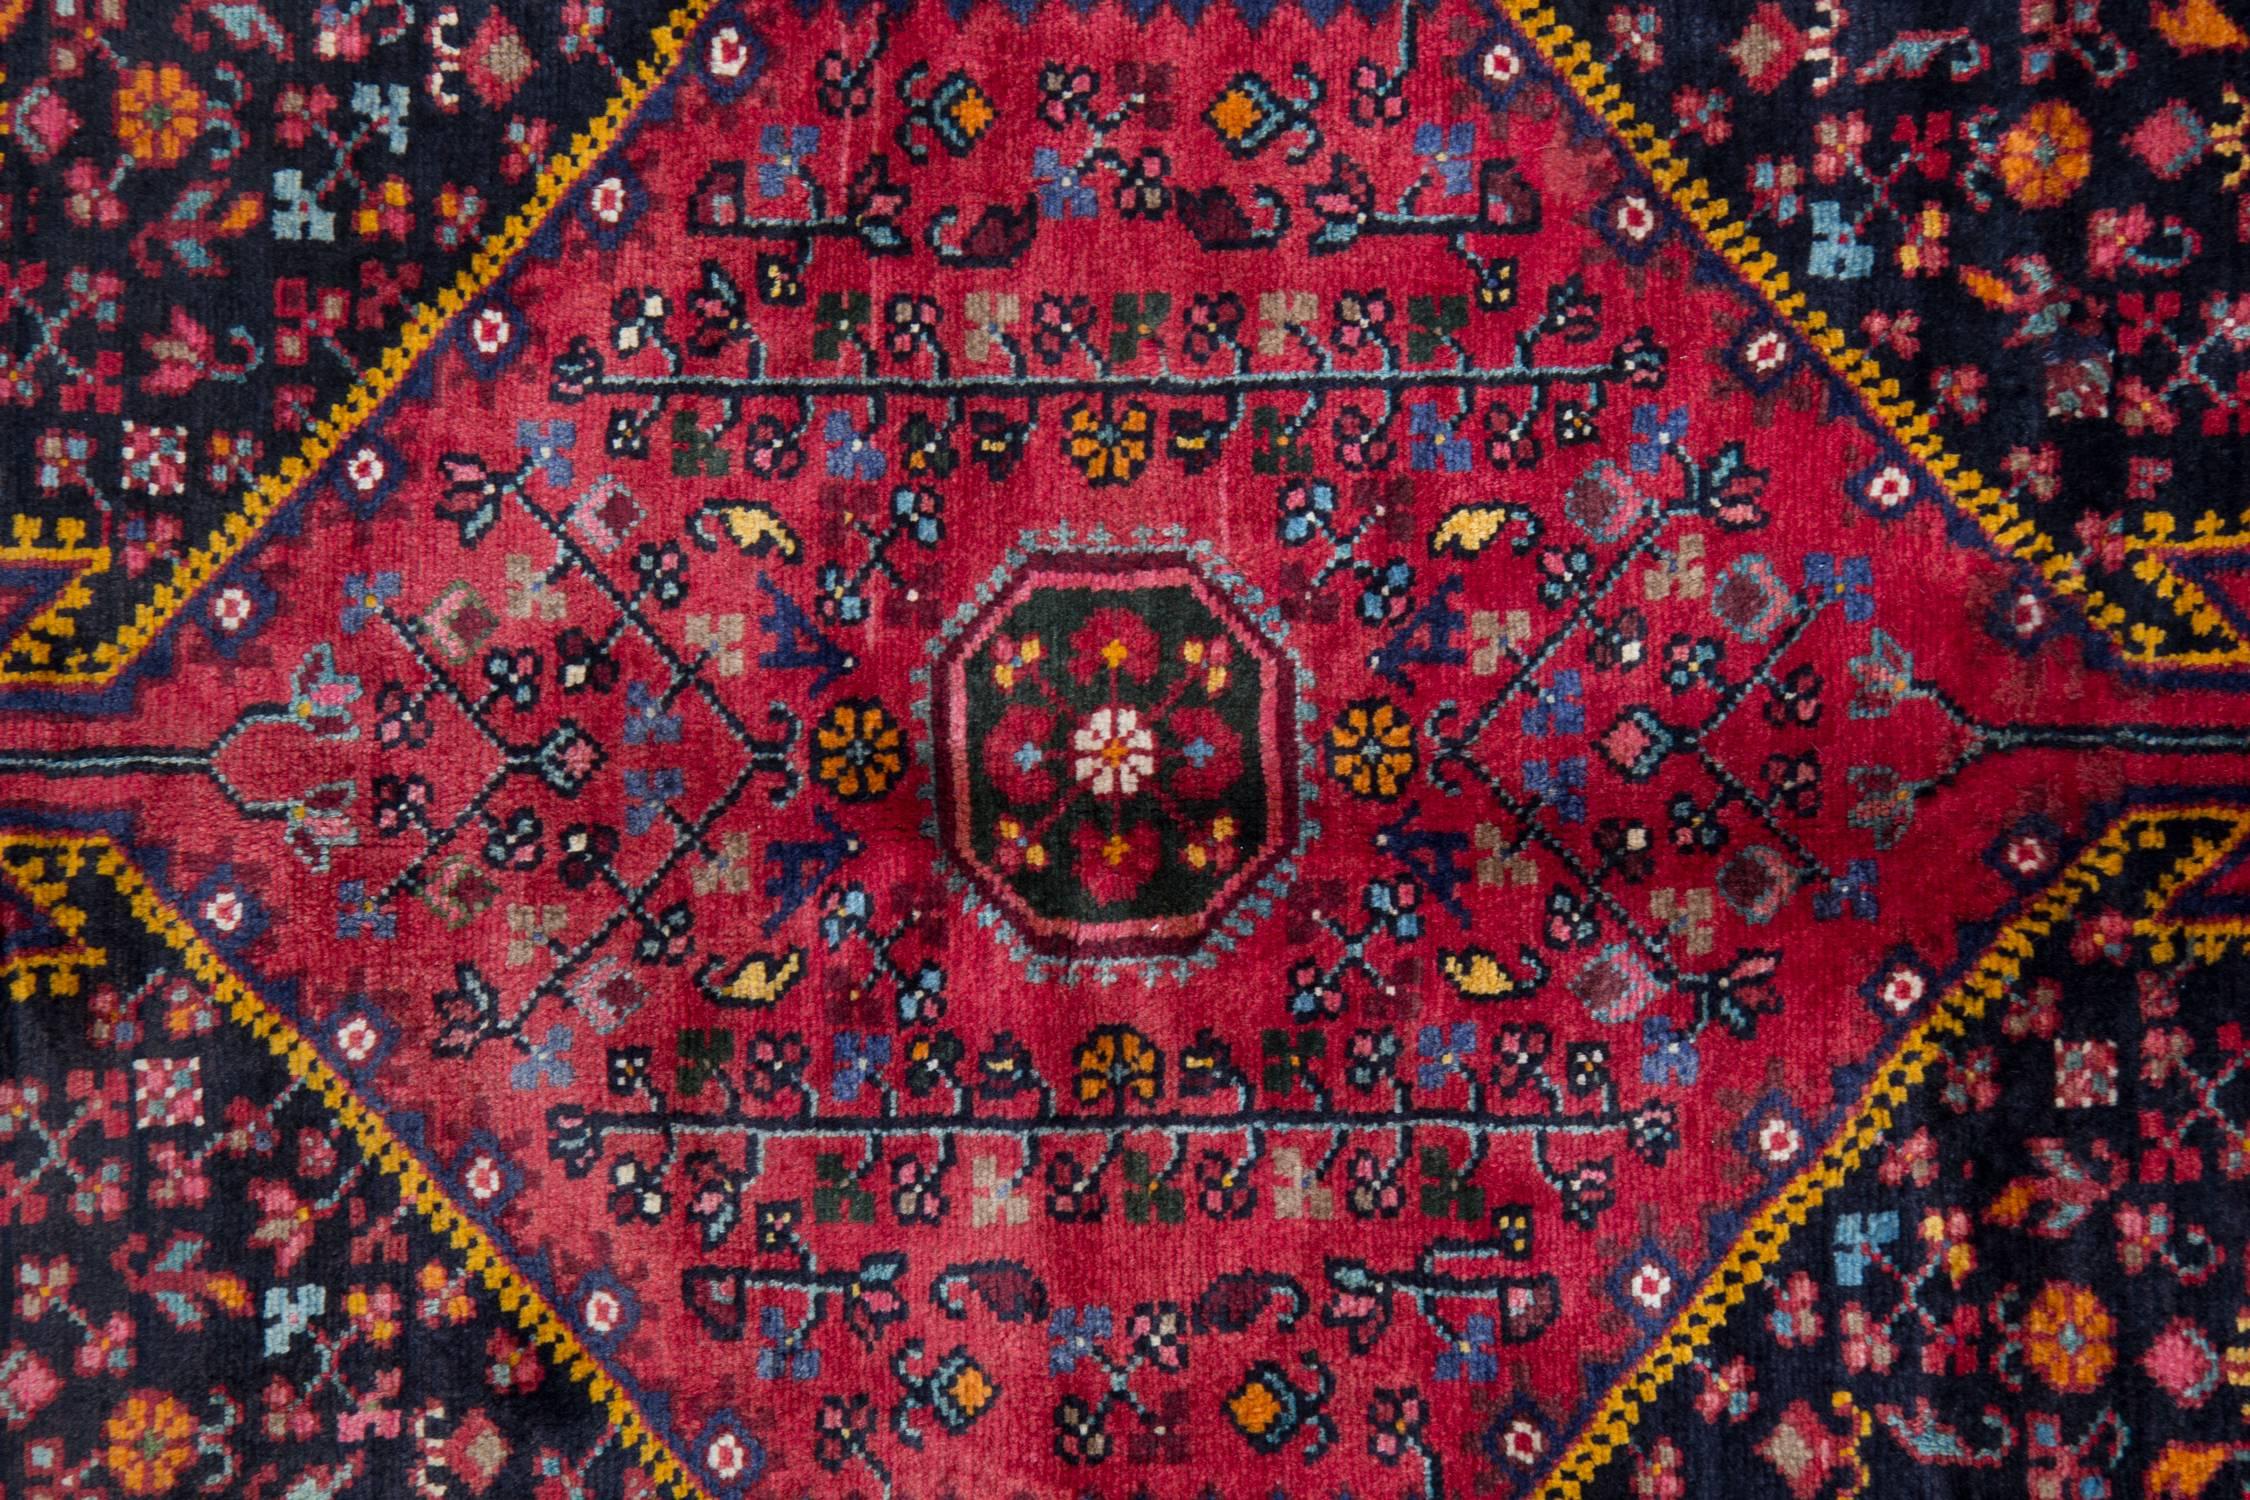 This deep red wool rug was woven by hand with locally sourced materials in Afghanistan in the 1970s. The design features a hexagon medallion with intricately woven motifs and patterns and a highly decorative surround design and border.
This elegant